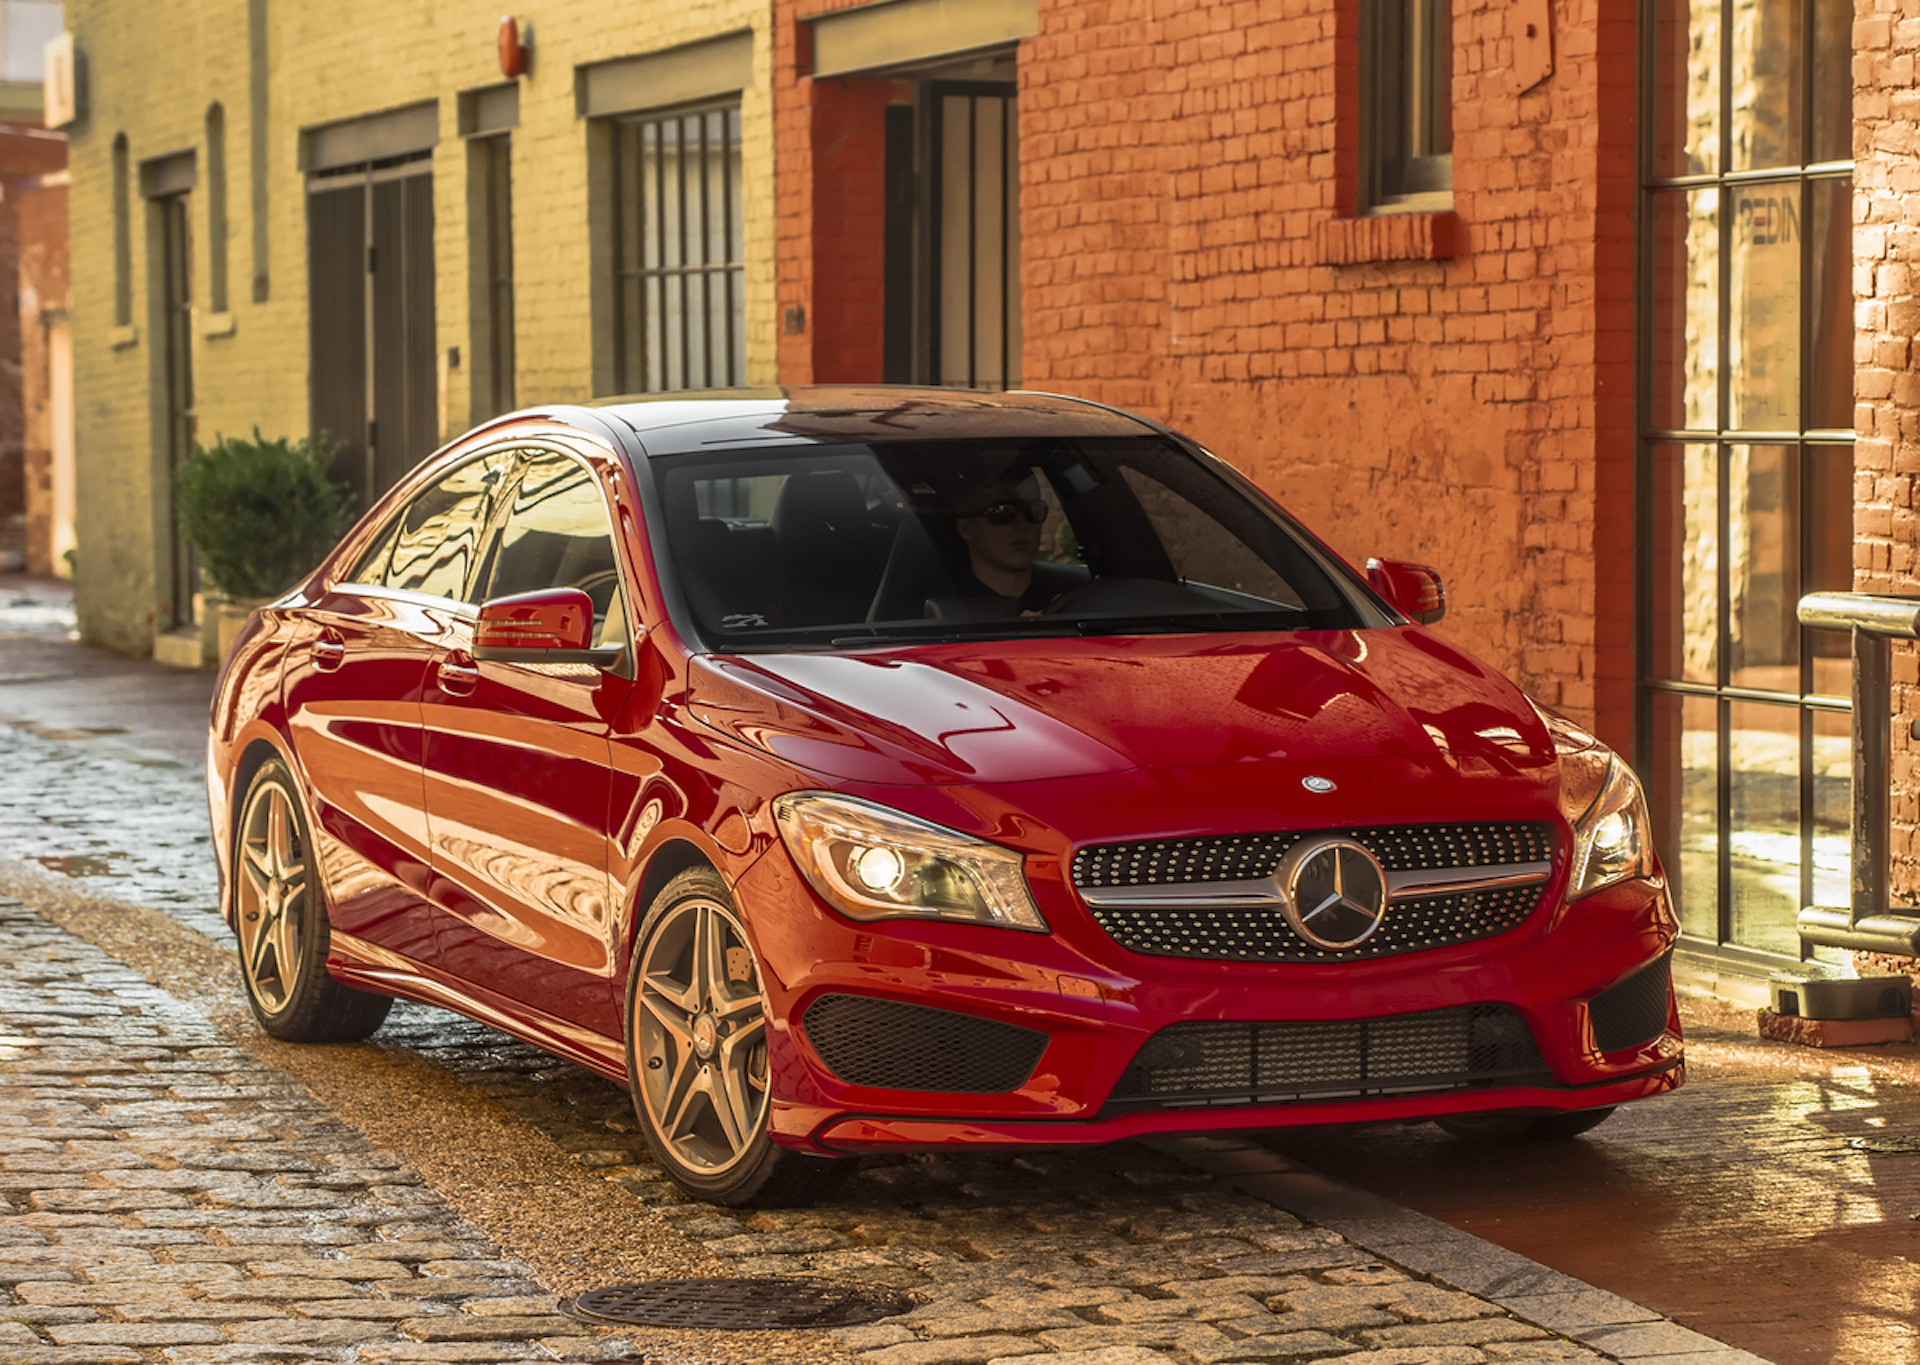 Mercedes-Benz CLA-Class Starting Price Rises To $32,425 For 2015